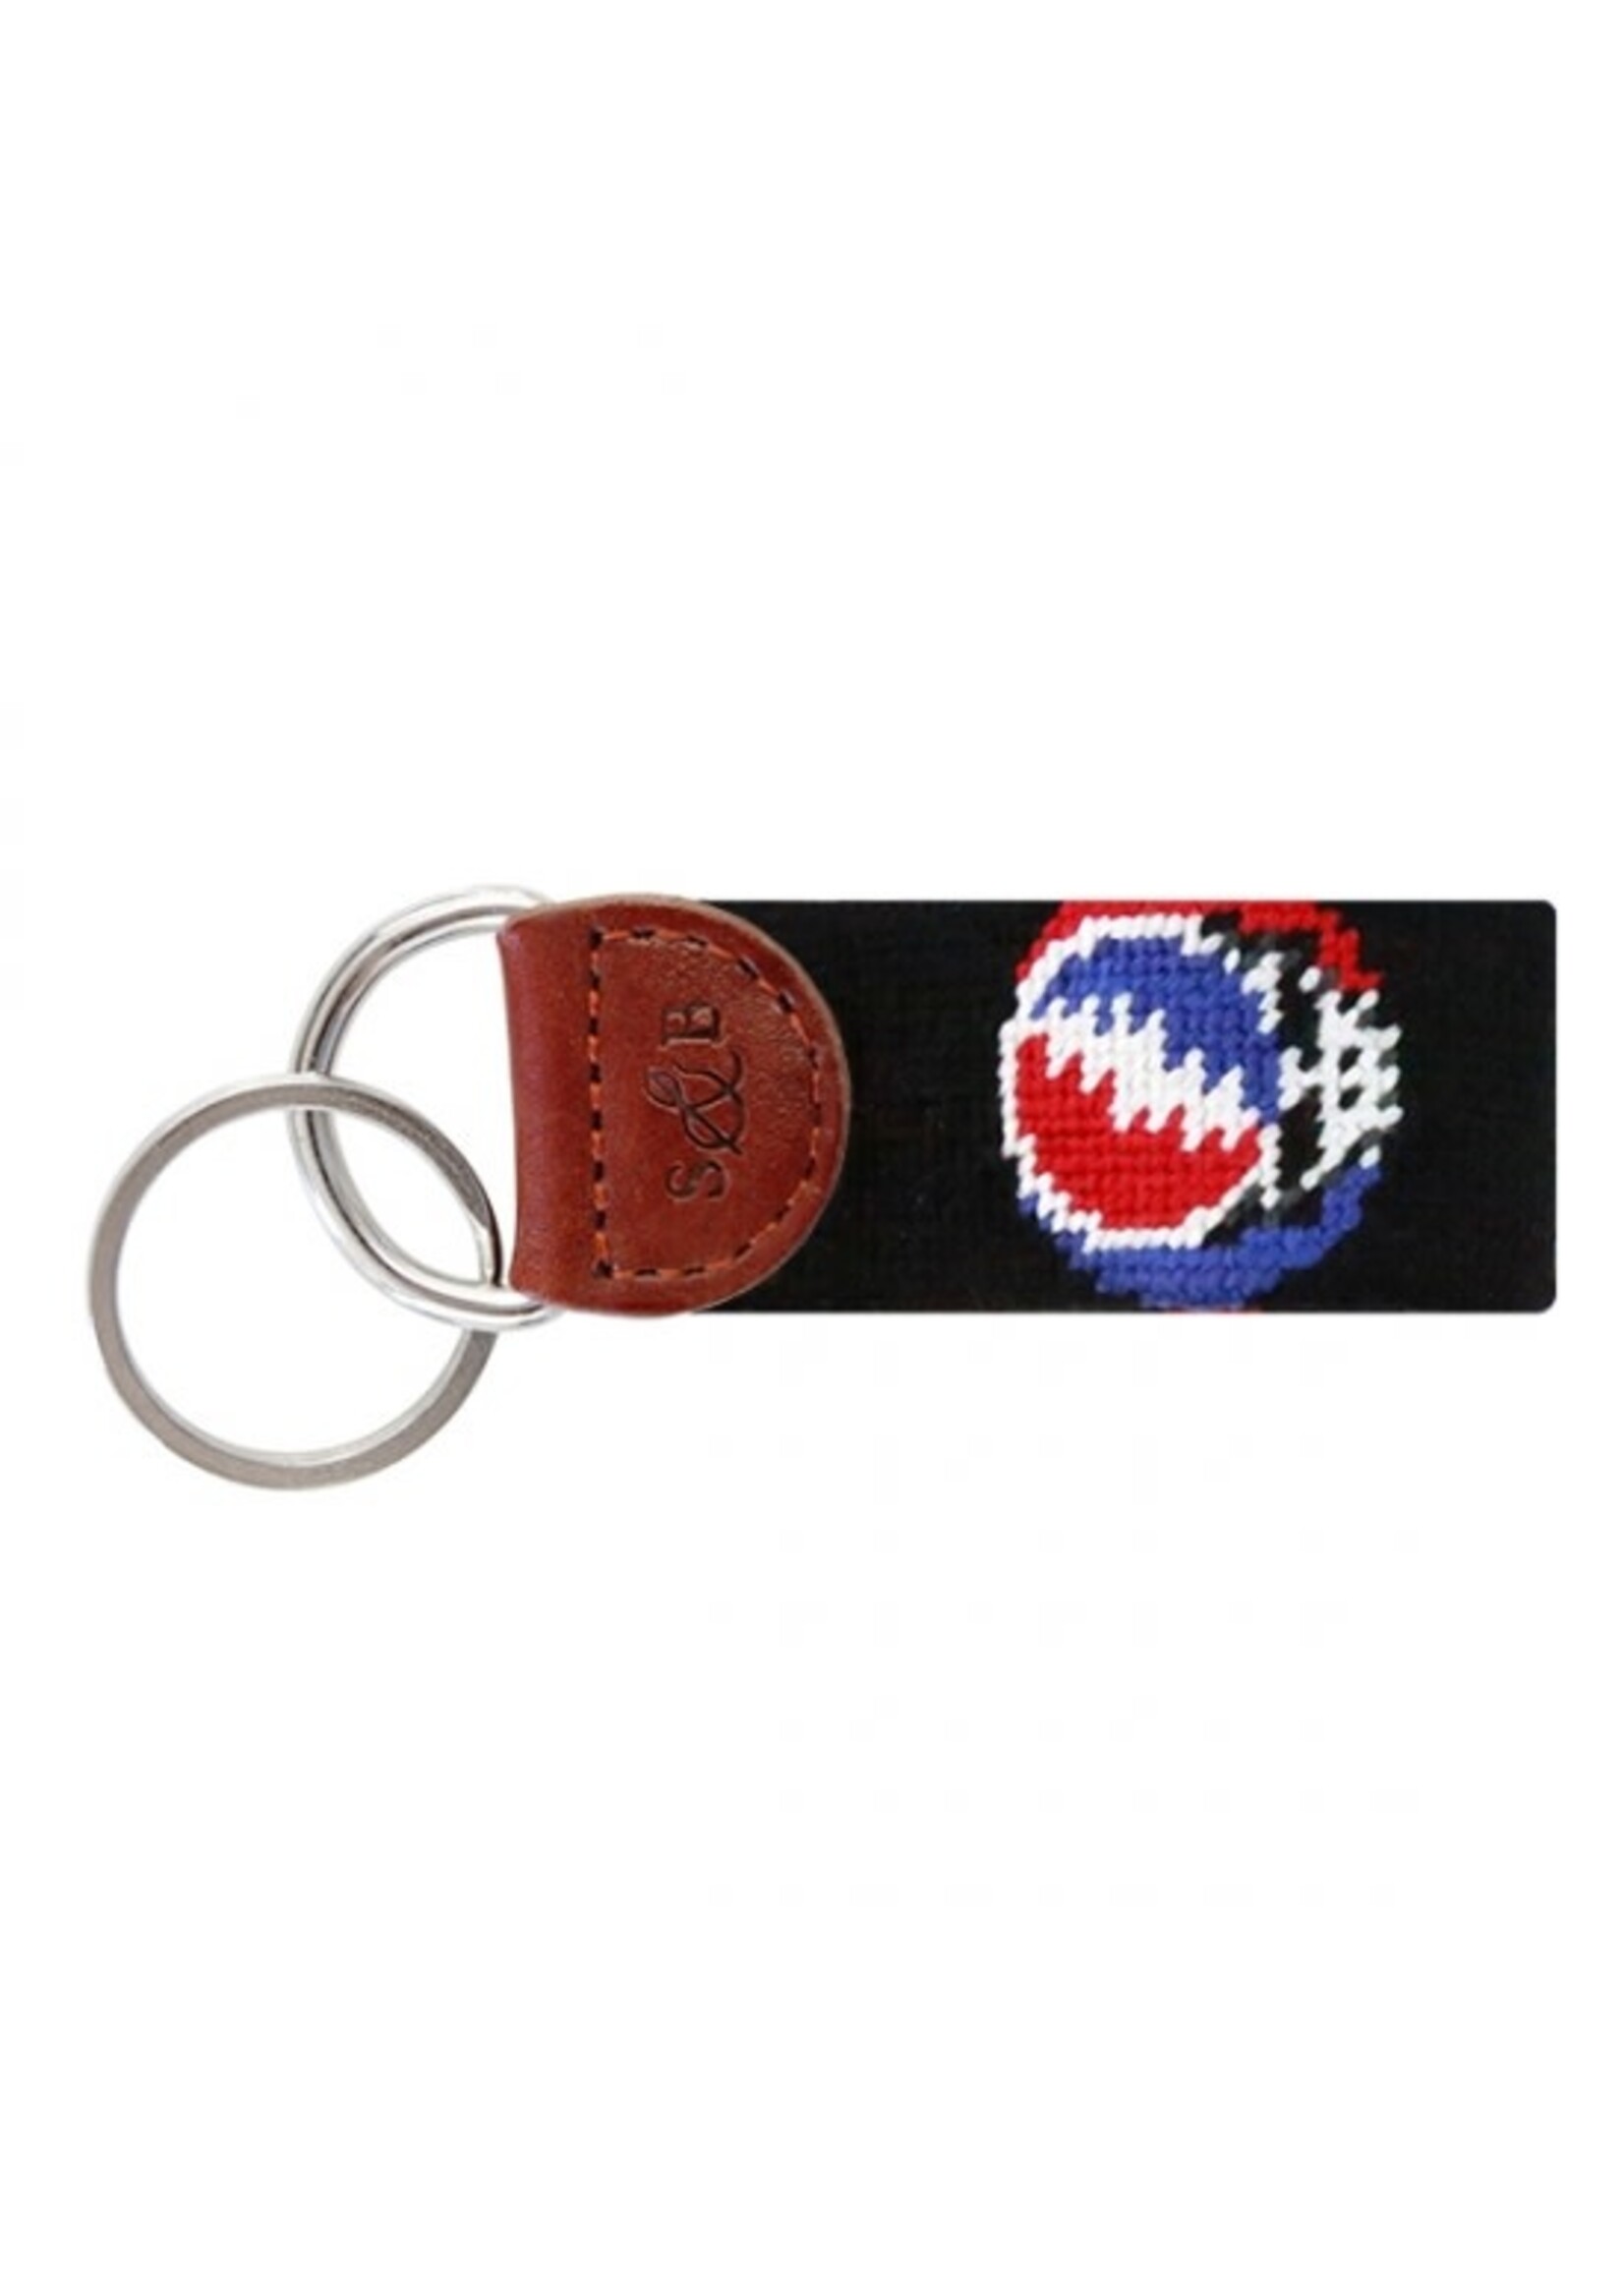 Smathers & Branson Steal Your Face Key Fob